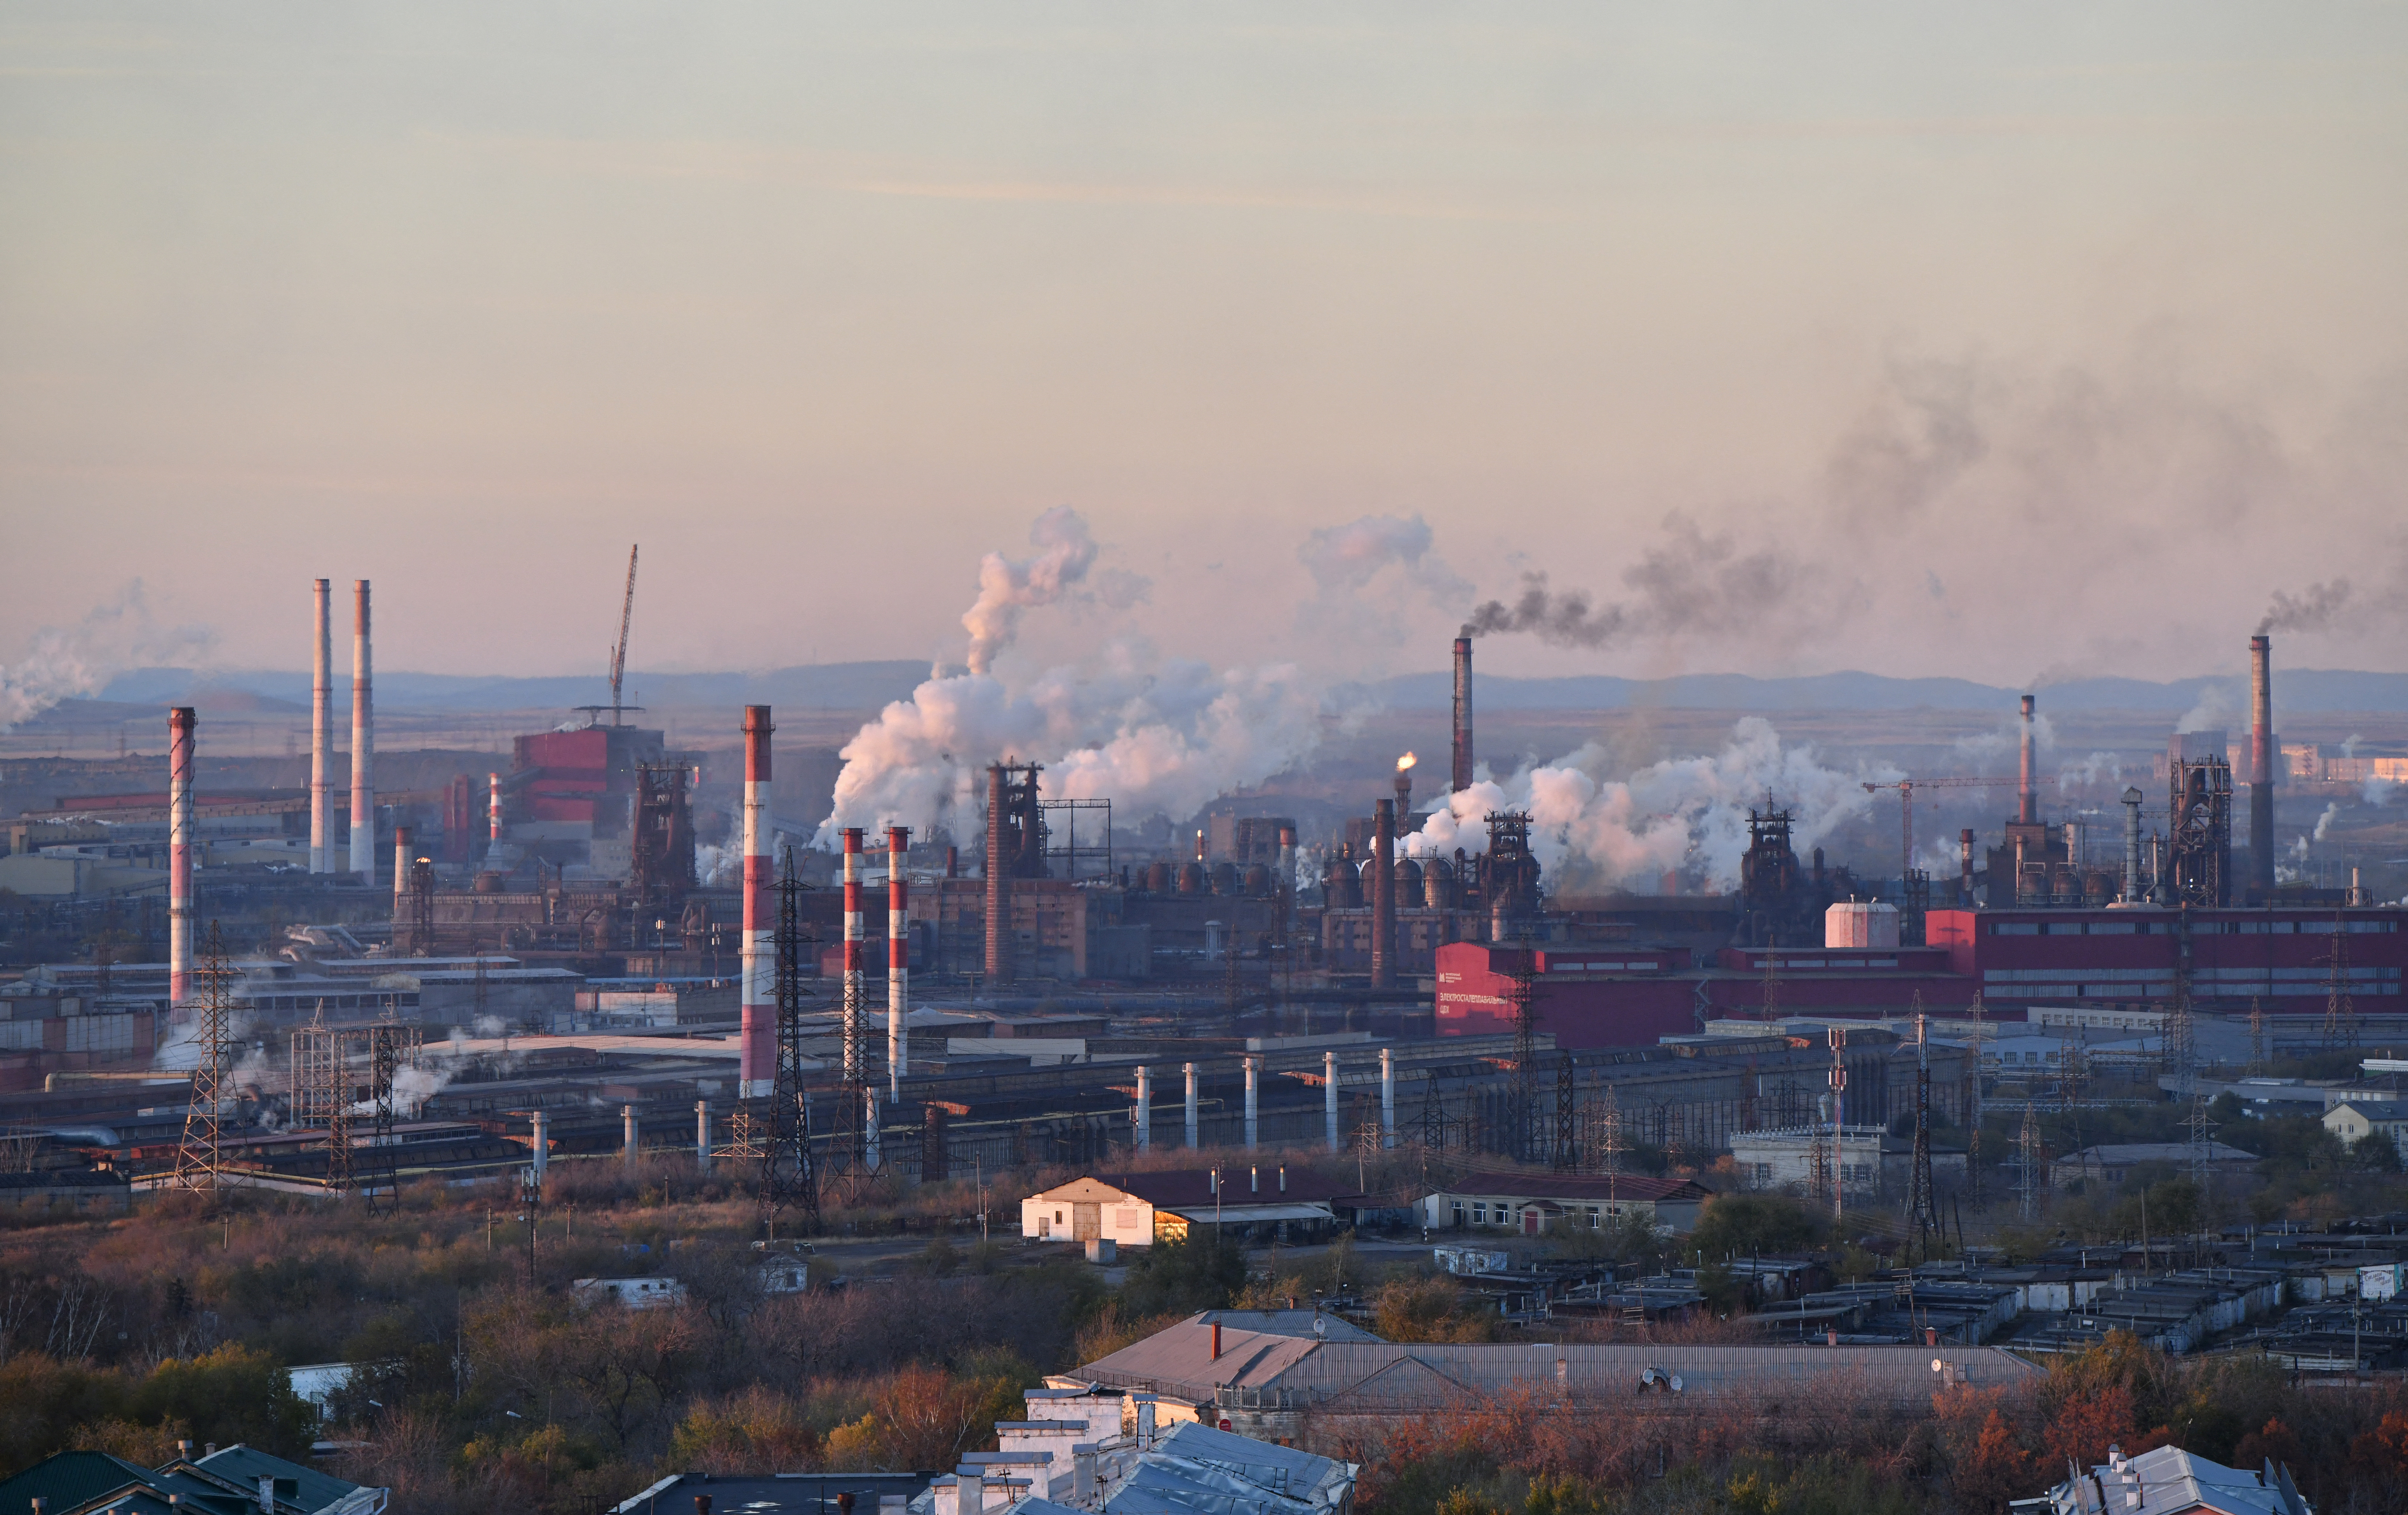 A view shows Magnitogorsk Iron and Steel Works